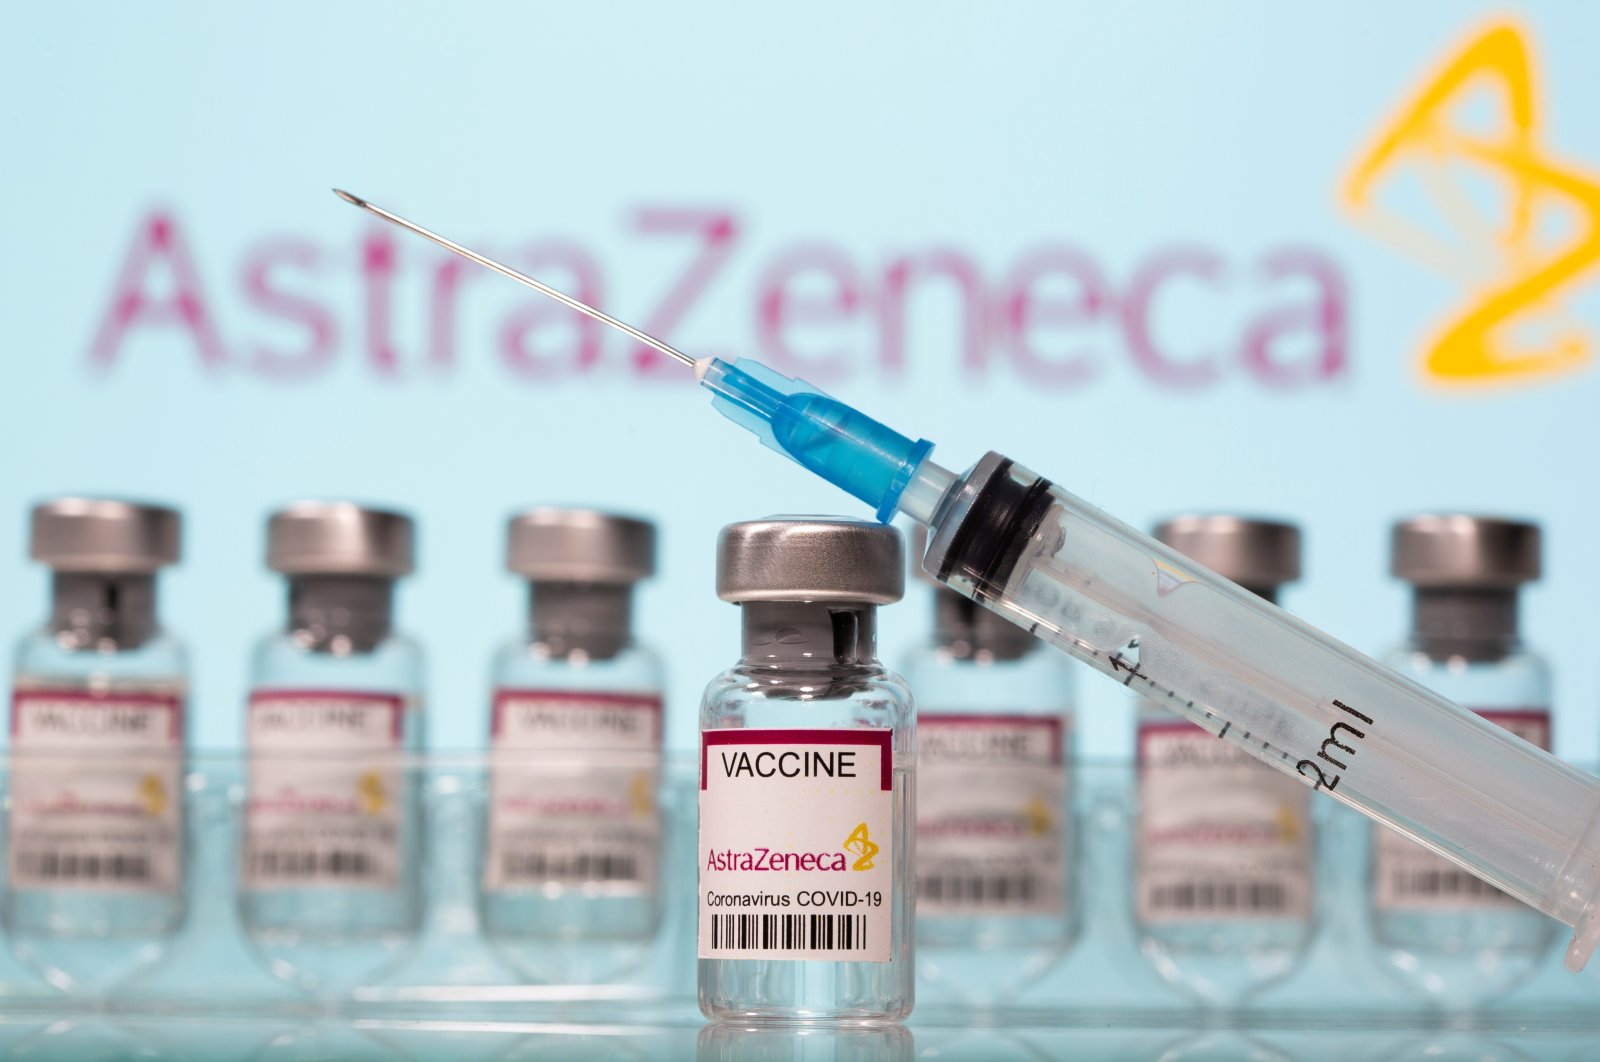 Vials labelled "AstraZeneca COVID-19 Coronavirus Vaccine" and a syringe are seen in front of a displayed AstraZeneca logo in this illustration photo taken March 10, 2021. (Reuters Photo)